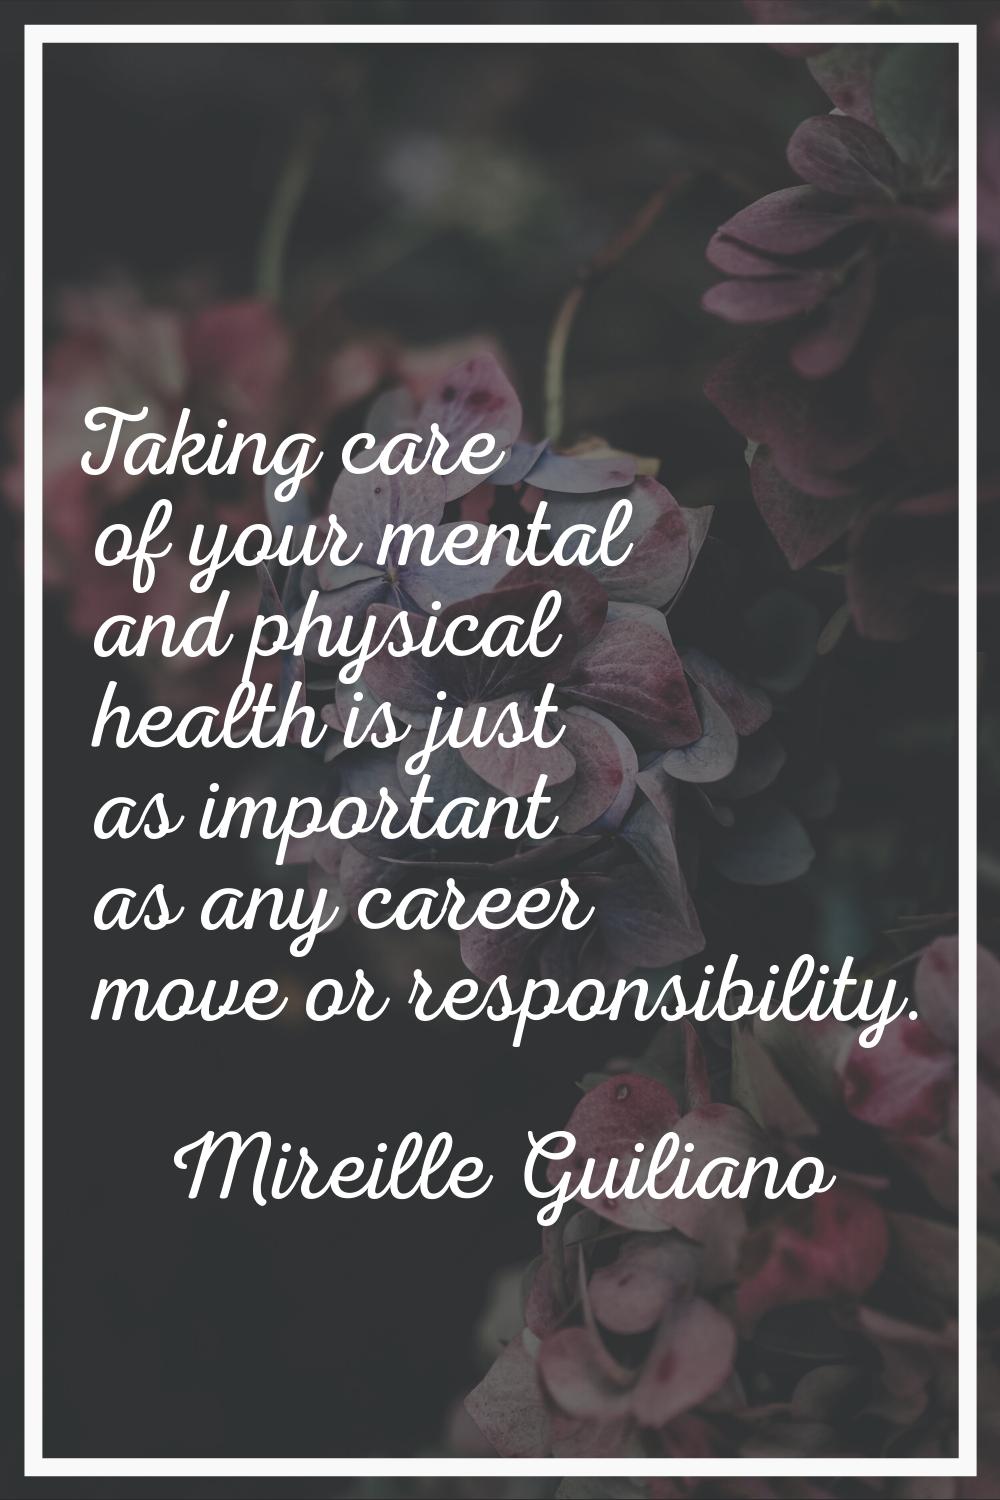 Taking care of your mental and physical health is just as important as any career move or responsib